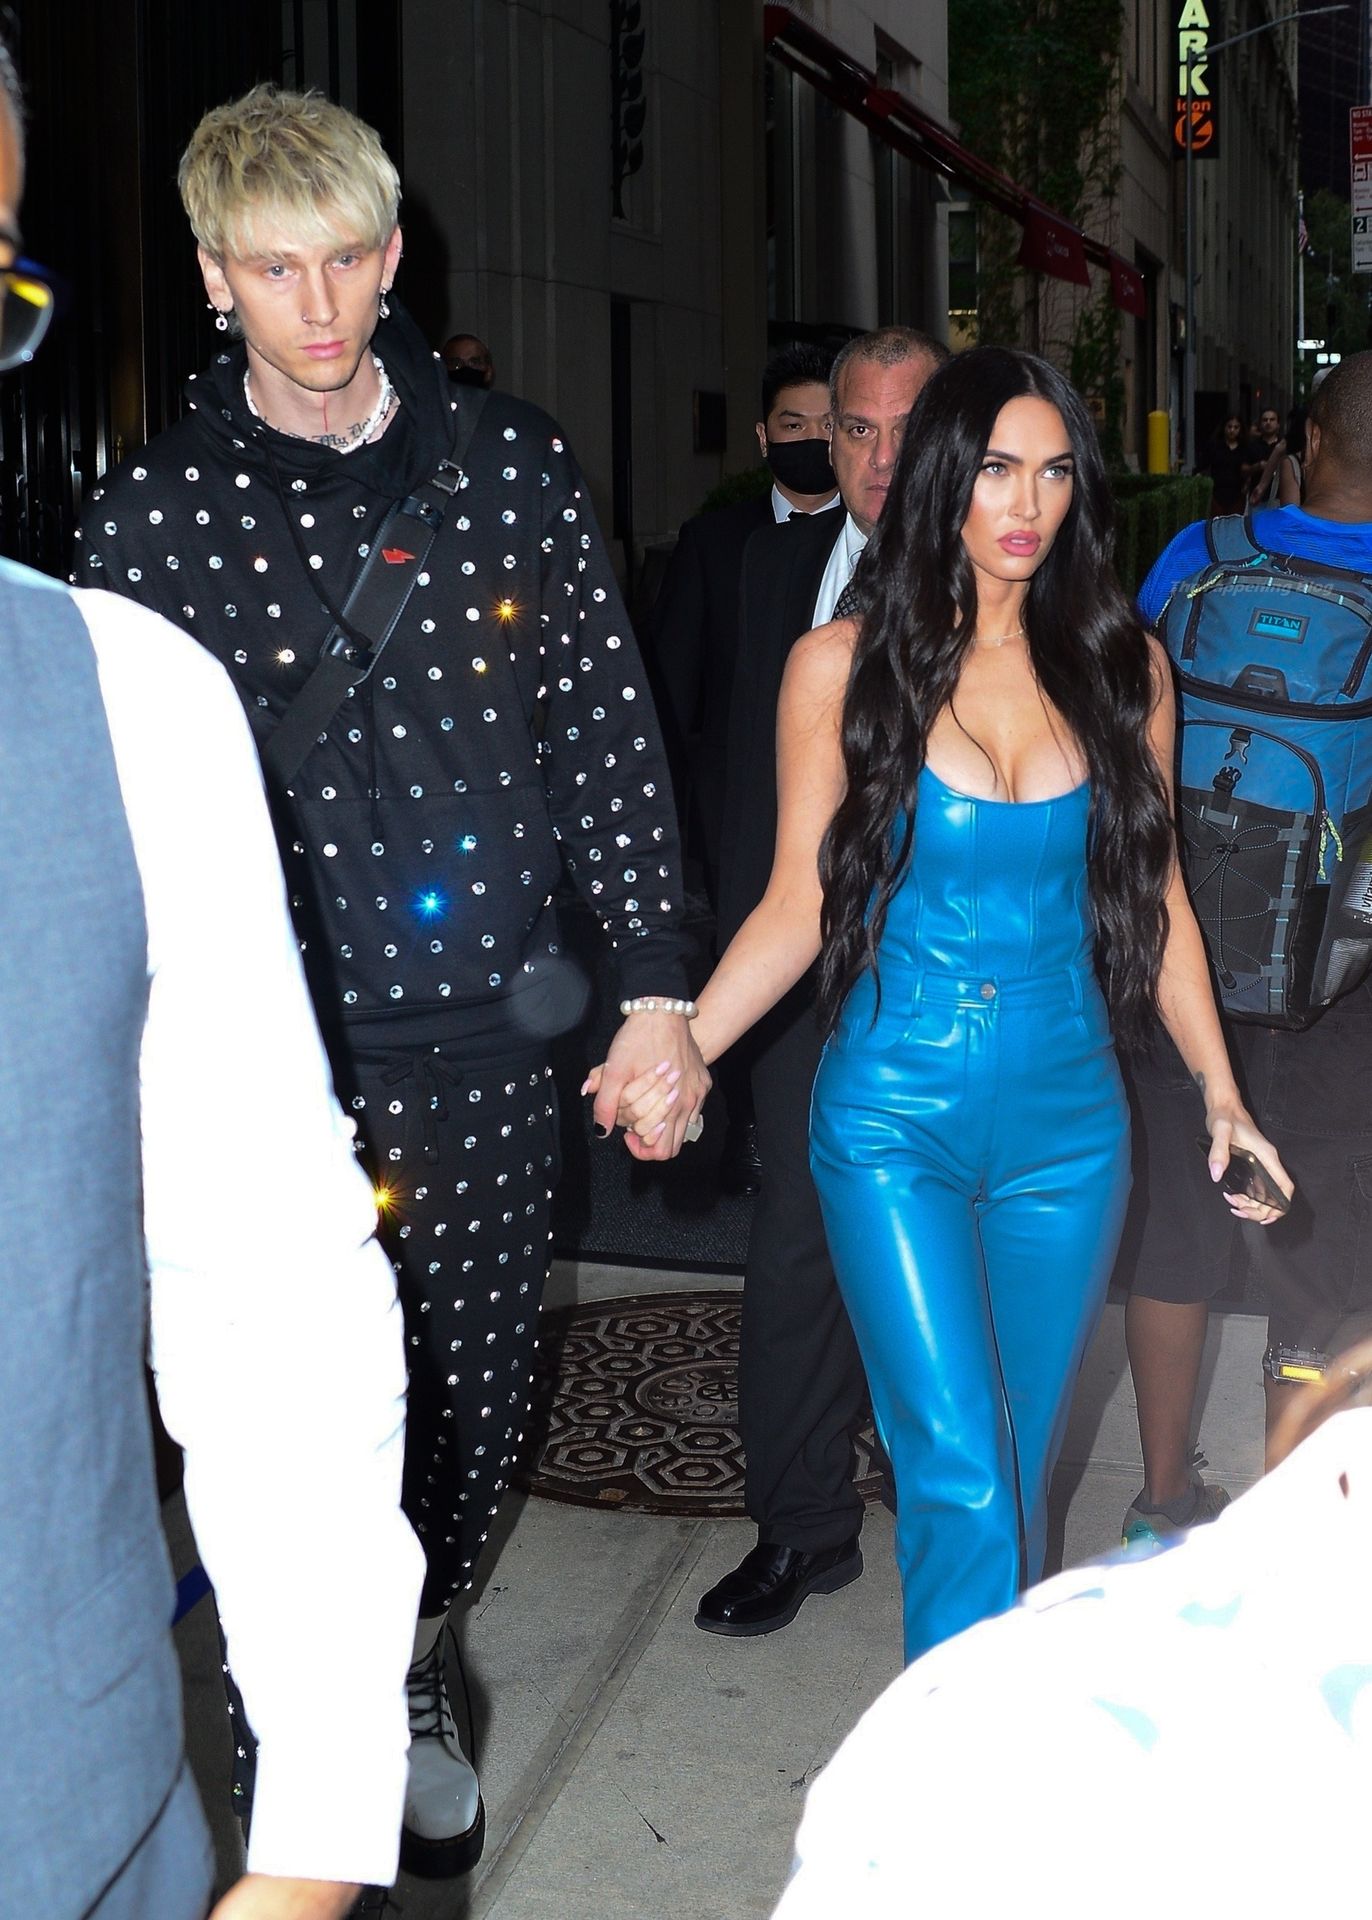 Megan Fox And Machine Gun Kelly Hold Hands Heading Out In The Big Apple 7 Photos Nude Celebrity